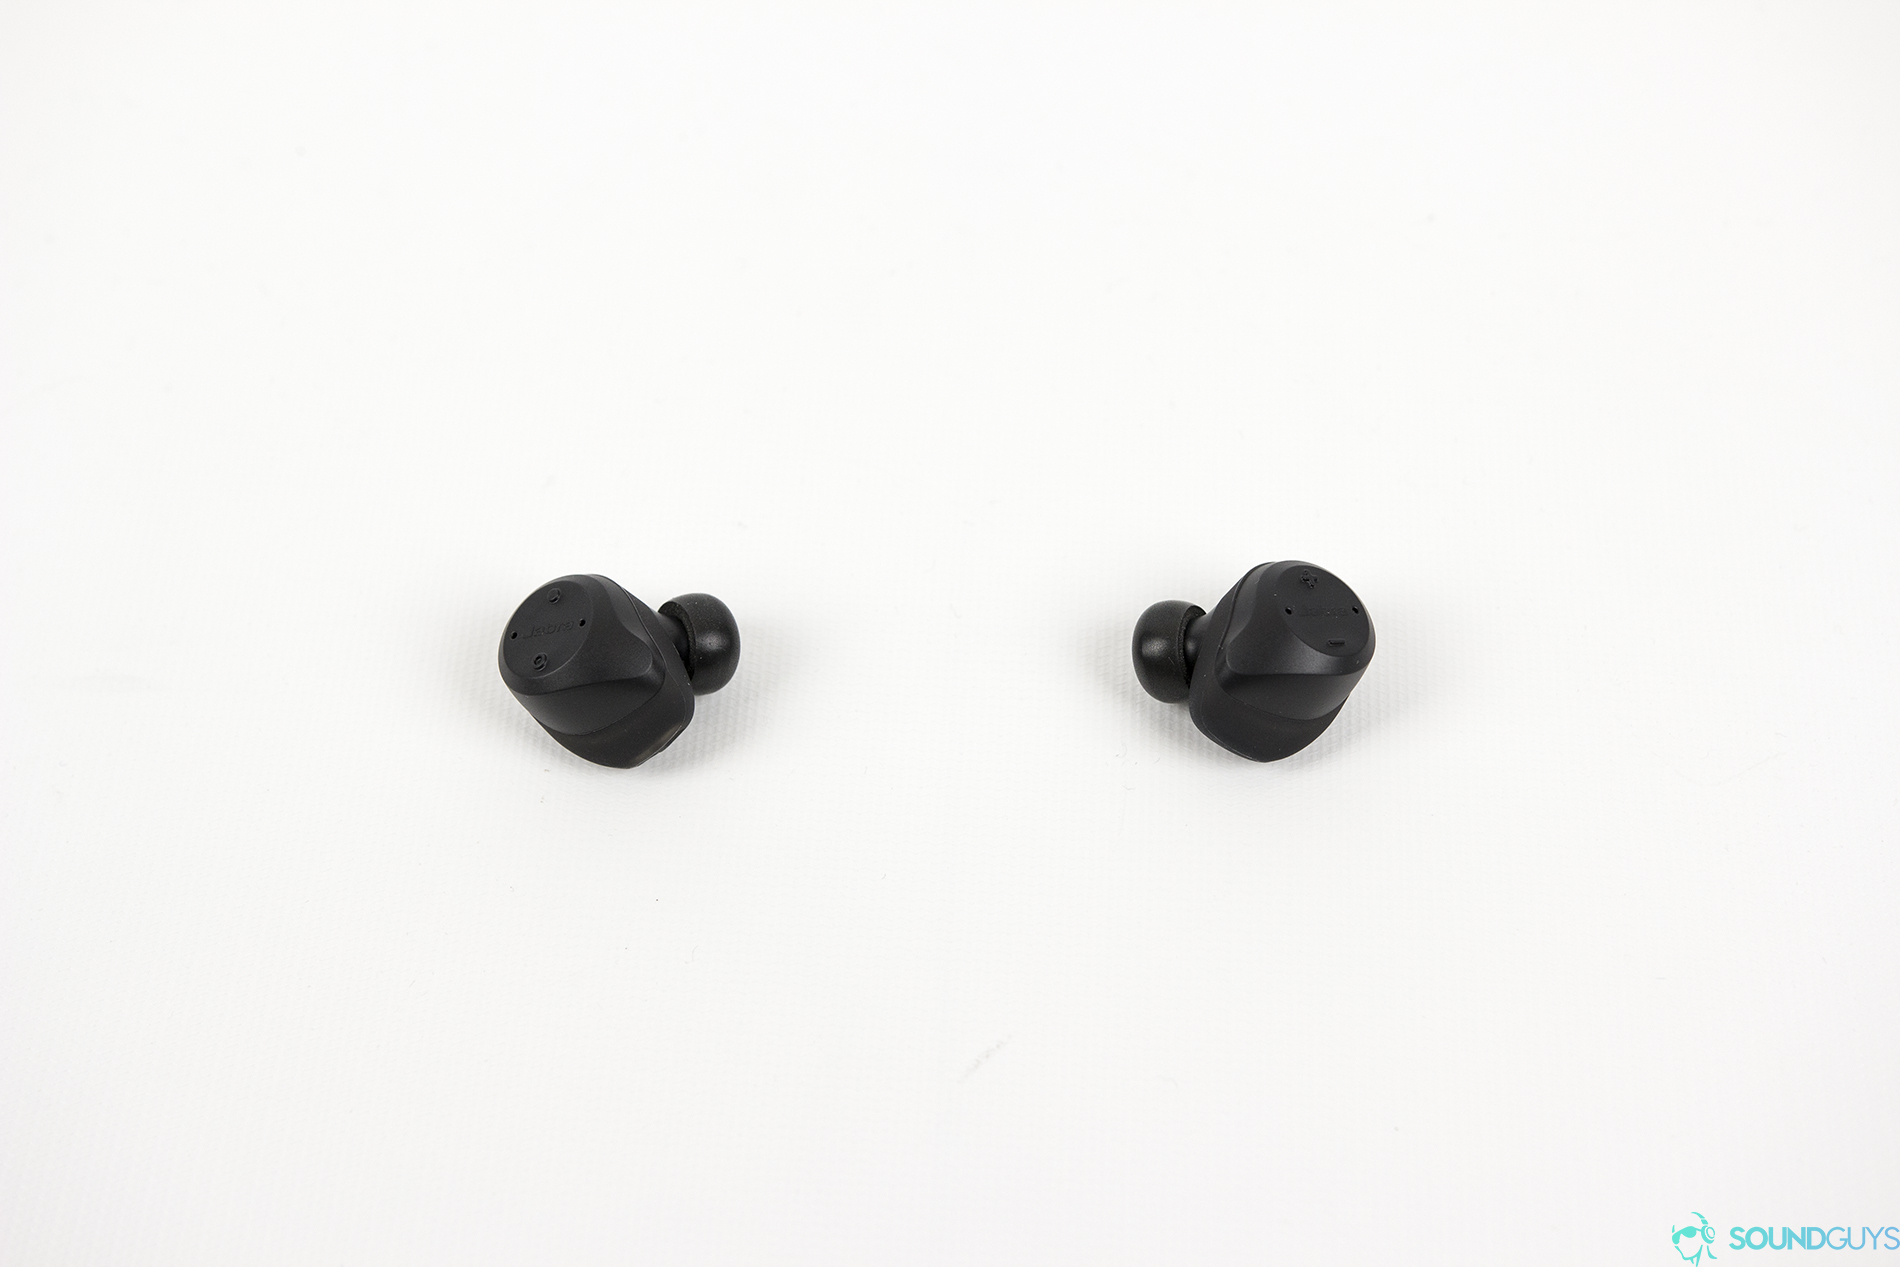 The Jabra Elite Sport Wireless earbuds are as minimal as it gets. Their all black look makes it easy to keep a covert look while listening. Pictured: The earbuds on a completely white background.